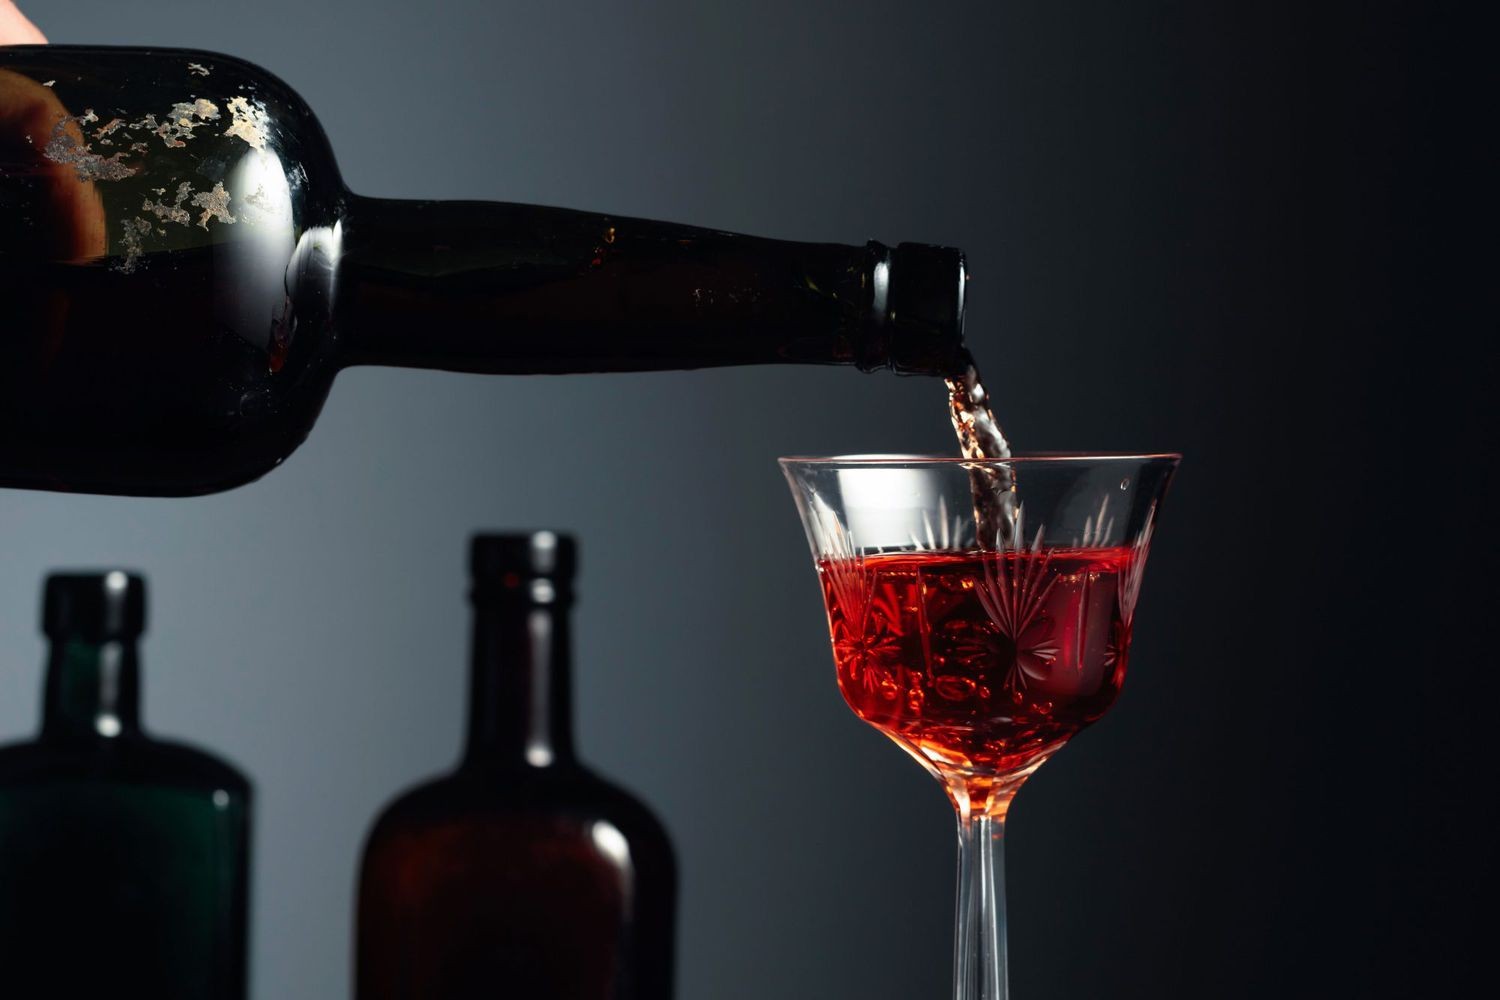 Top 20 Most Popular and Famous Wines in the World